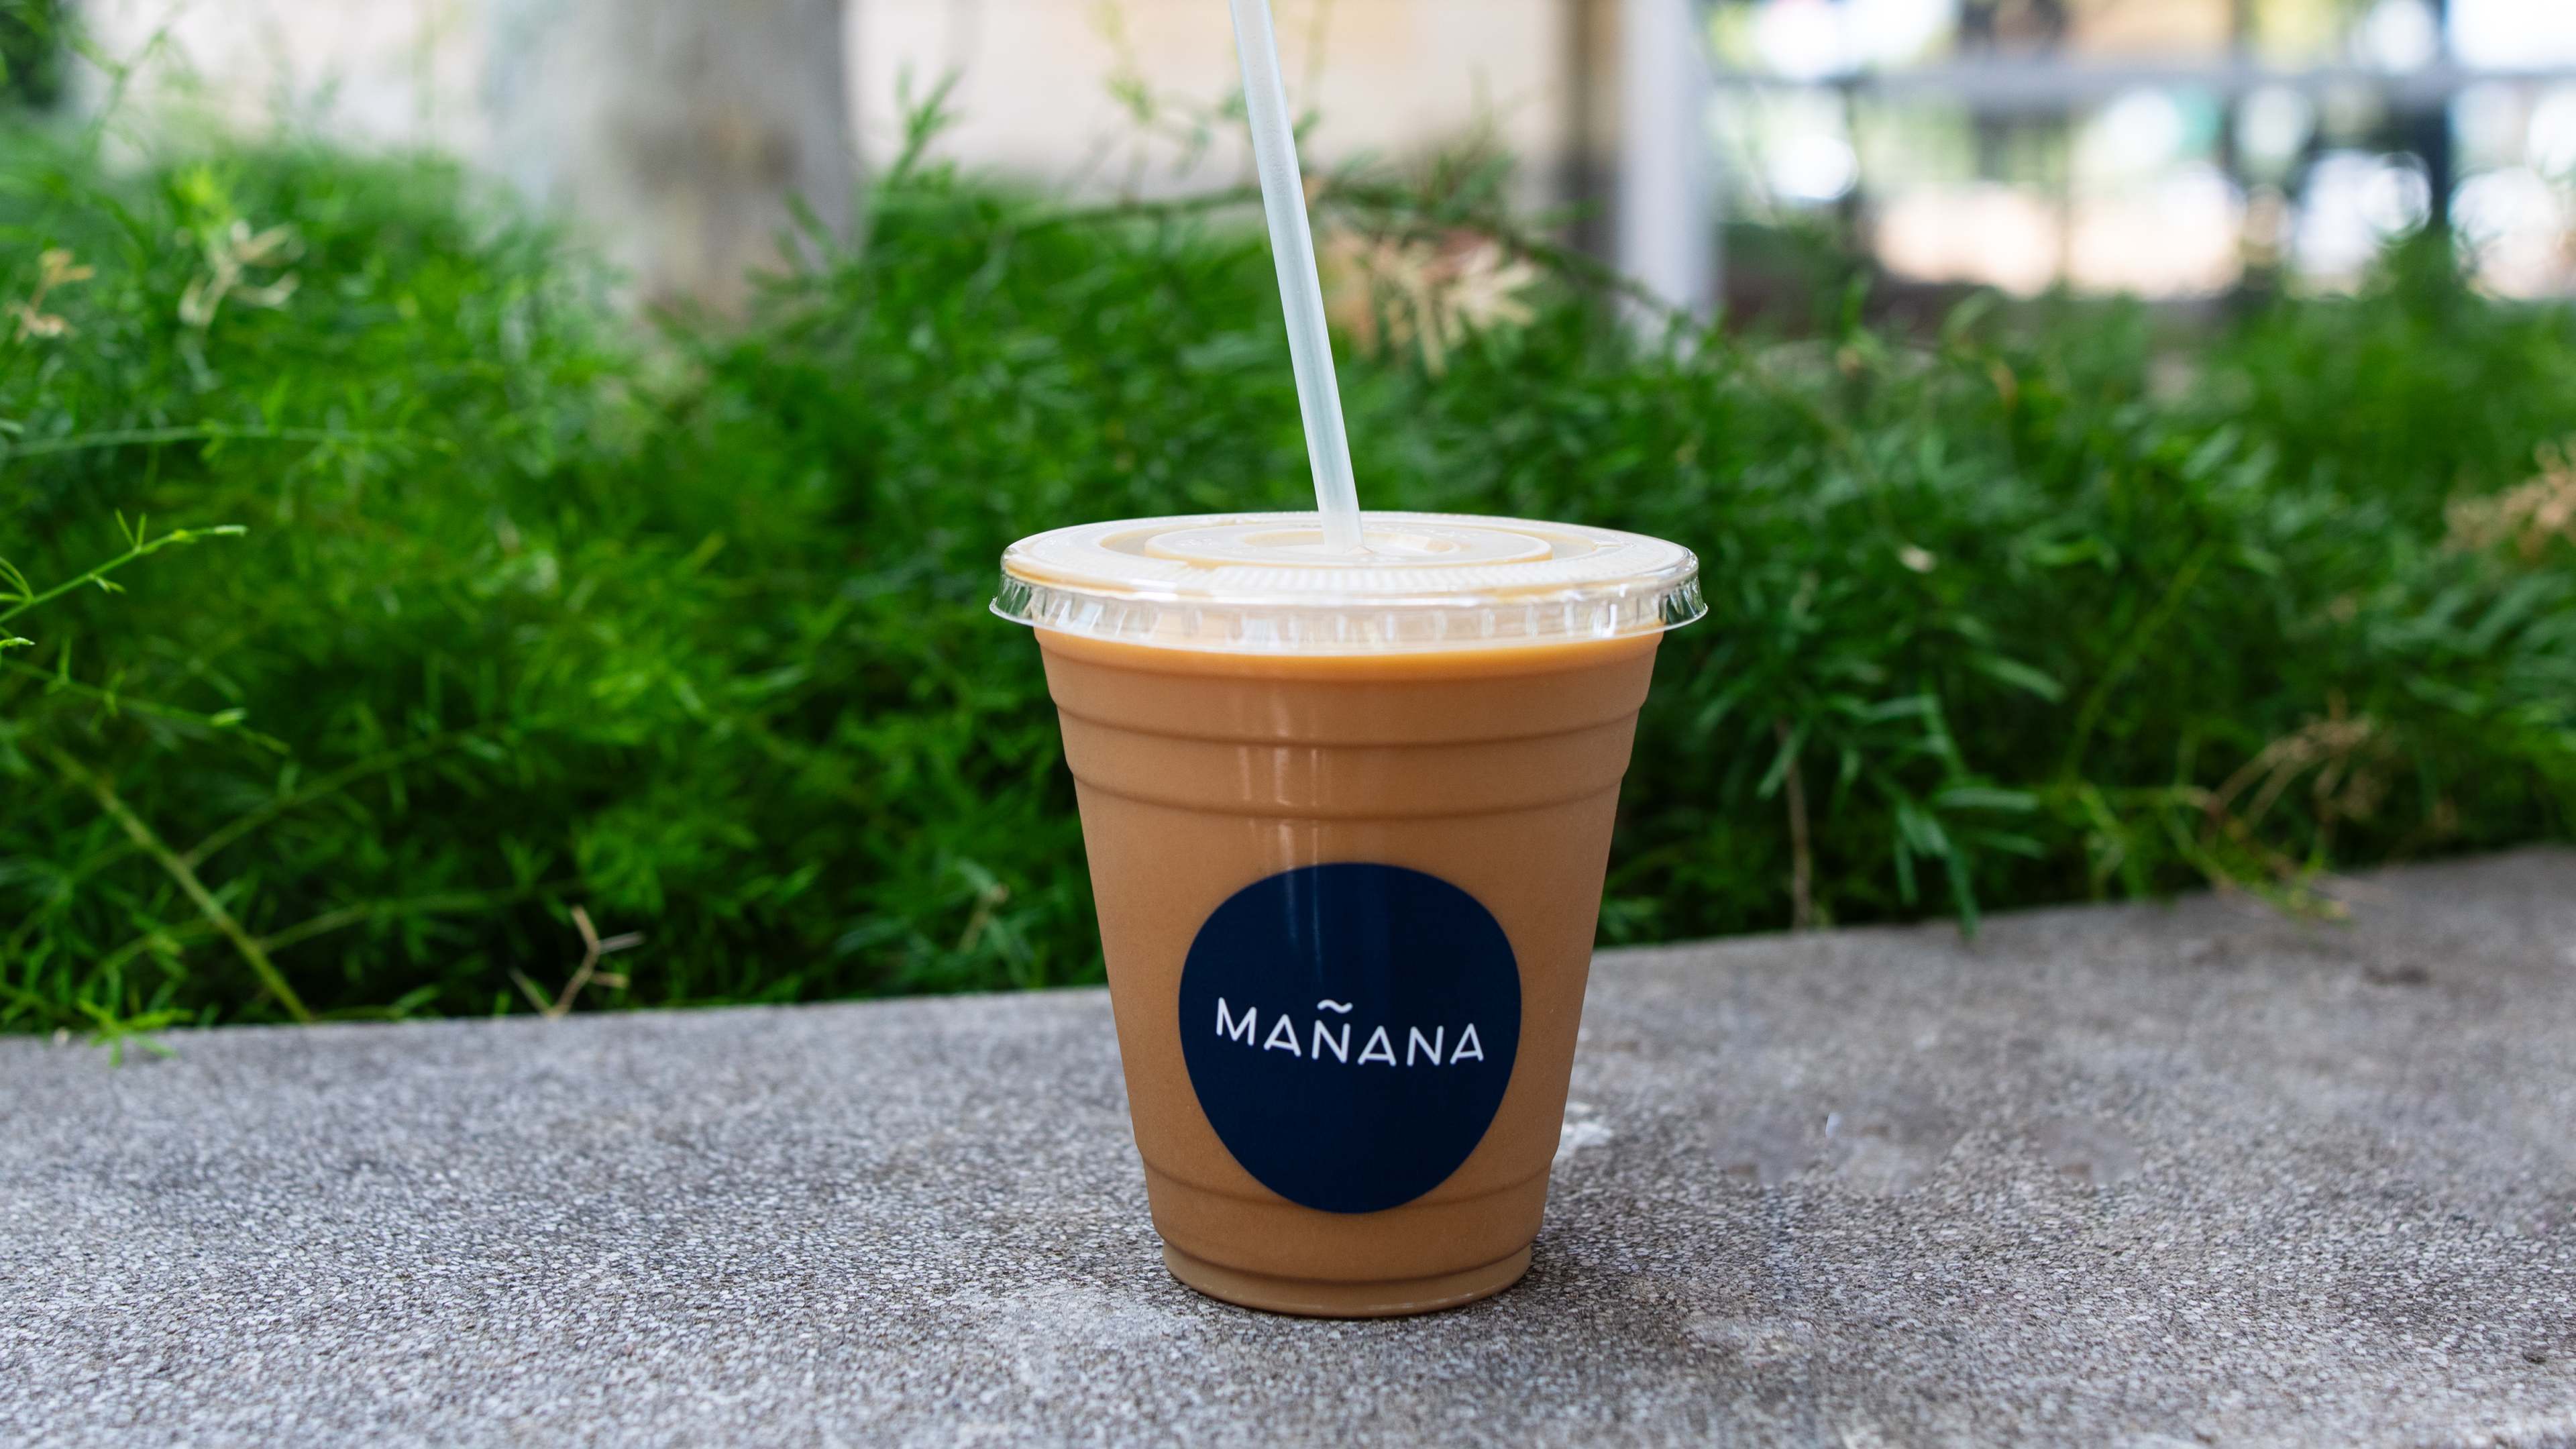 An iced coffee drink in a plastic cup with a Mañana branded sticker, sitting on a concrete ledge outside.